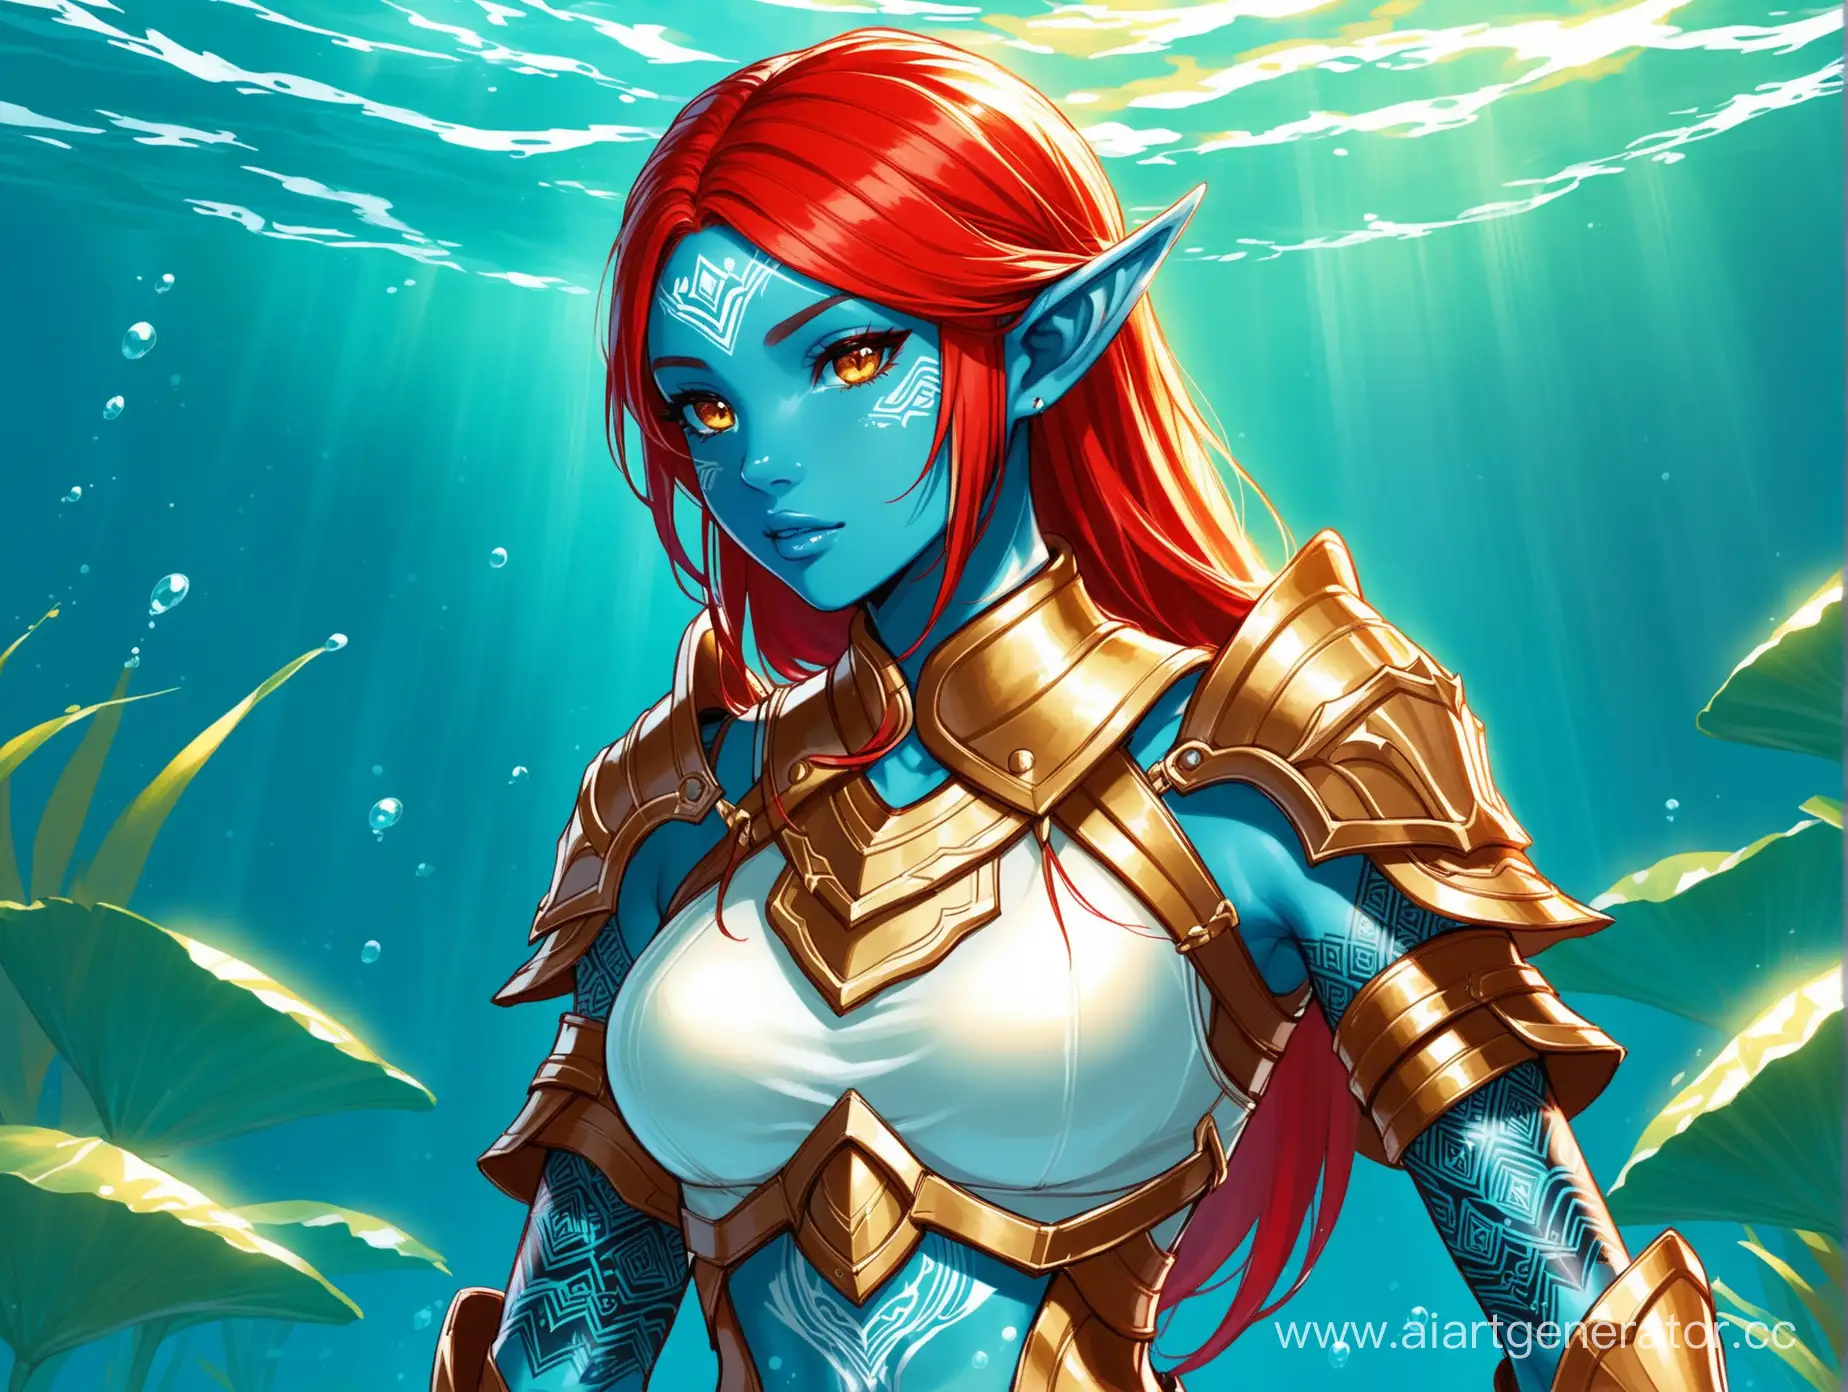 Aquatic-Elf-Ranger-Girl-in-Light-Armor-with-Ethic-Tattoos-and-Red-Hair